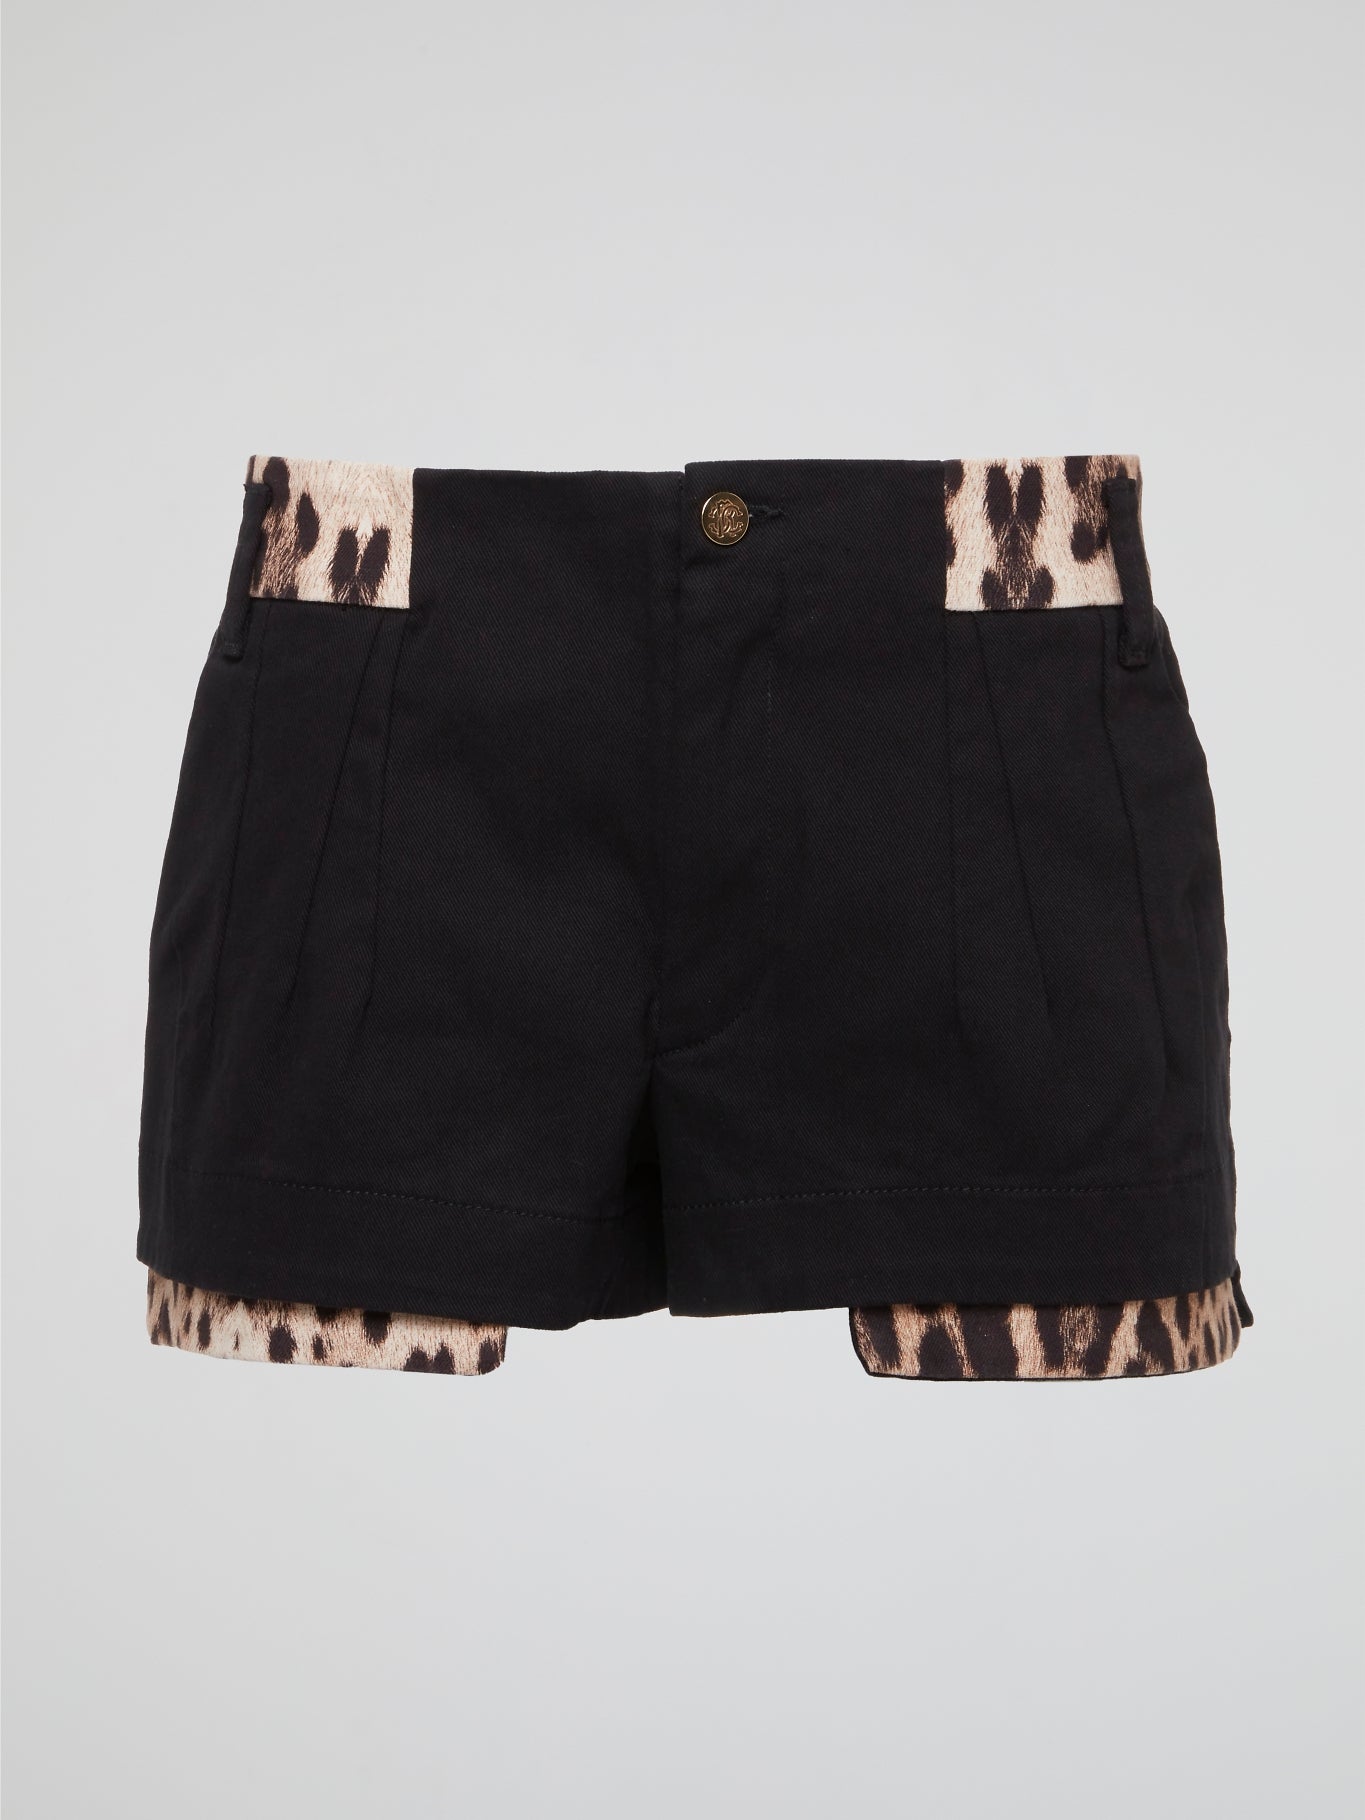 Unleash your inner wild side with these fierce Black Leopard Trim Shorts by Roberto Cavalli. Made for the fashion-forward individual who isn't afraid to stand out in a crowd, these shorts feature a bold leopard print trim that adds a touch of edgy sophistication to any outfit. Whether you're hitting the town or lounging at home, these shorts are sure to turn heads and make a statement wherever you go.